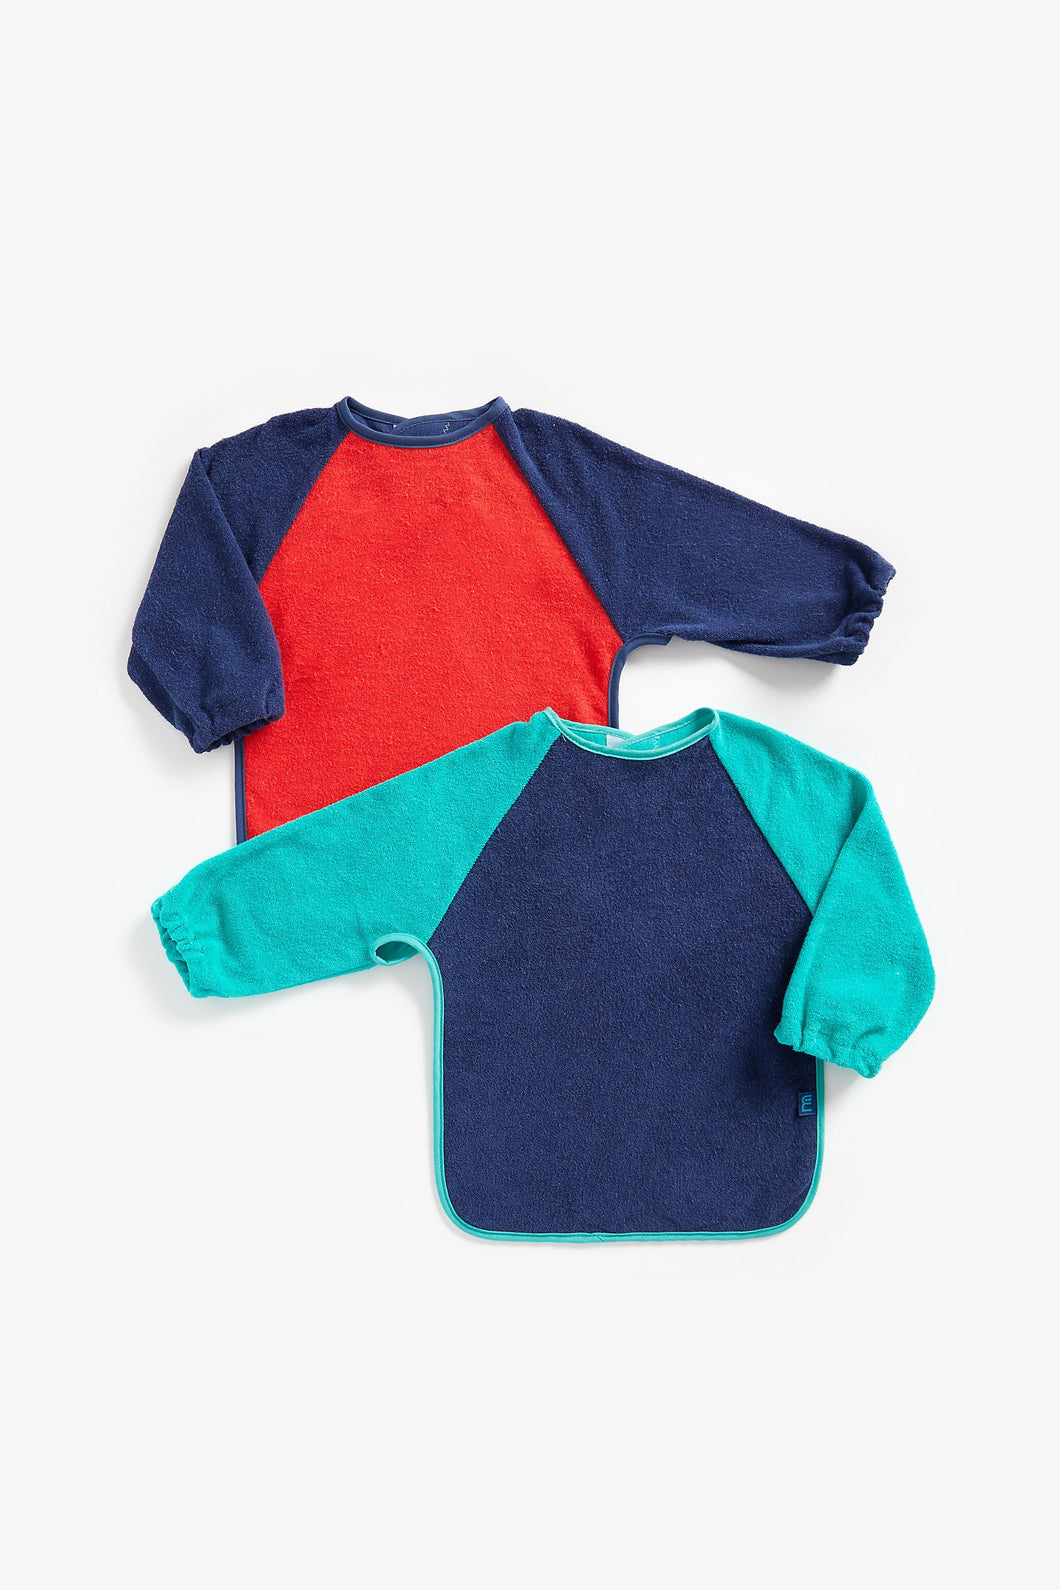 FREE GIFT - Mothercare Towelling Coverall Bibs Blue - 2 Pack (Worth $95)